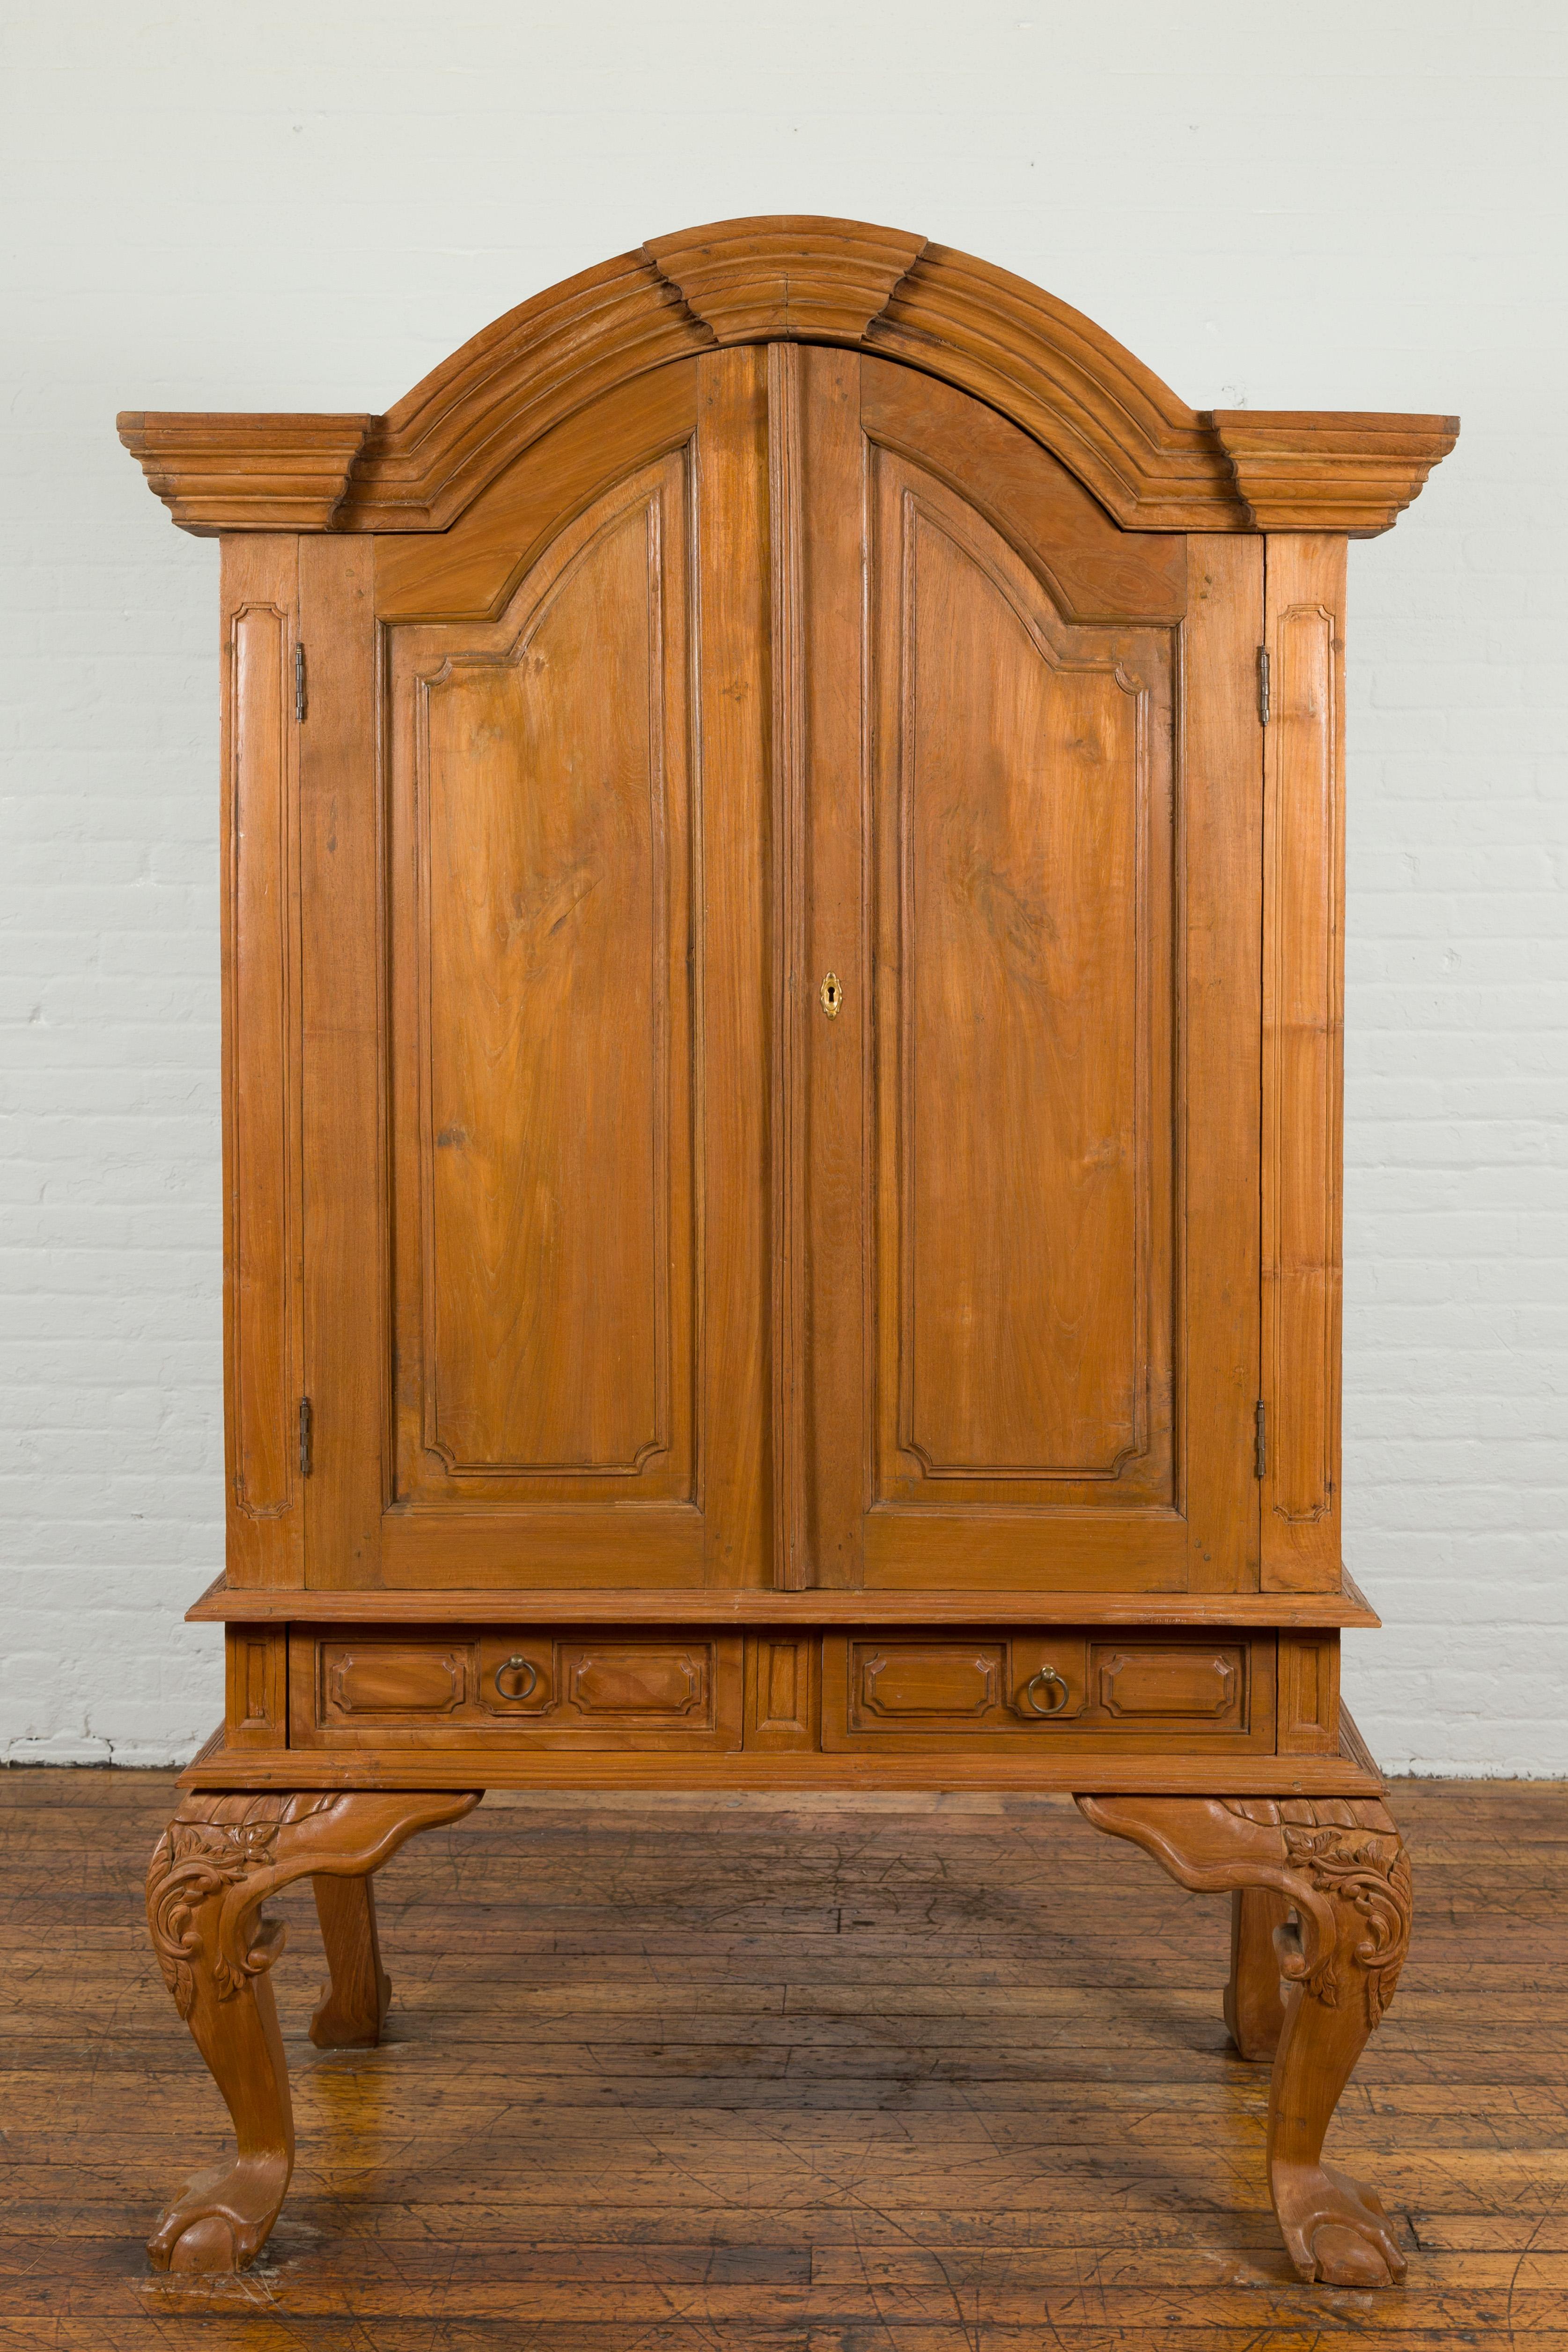 A Dutch Colonial period Indonesian teak cabinet from the late 19th century, with bonnet top, two drawers, cabriole legs and ball and claw feet. Created in Indonesia during the Dutch Colonial era, this teak cabinet features a molded bonnet top